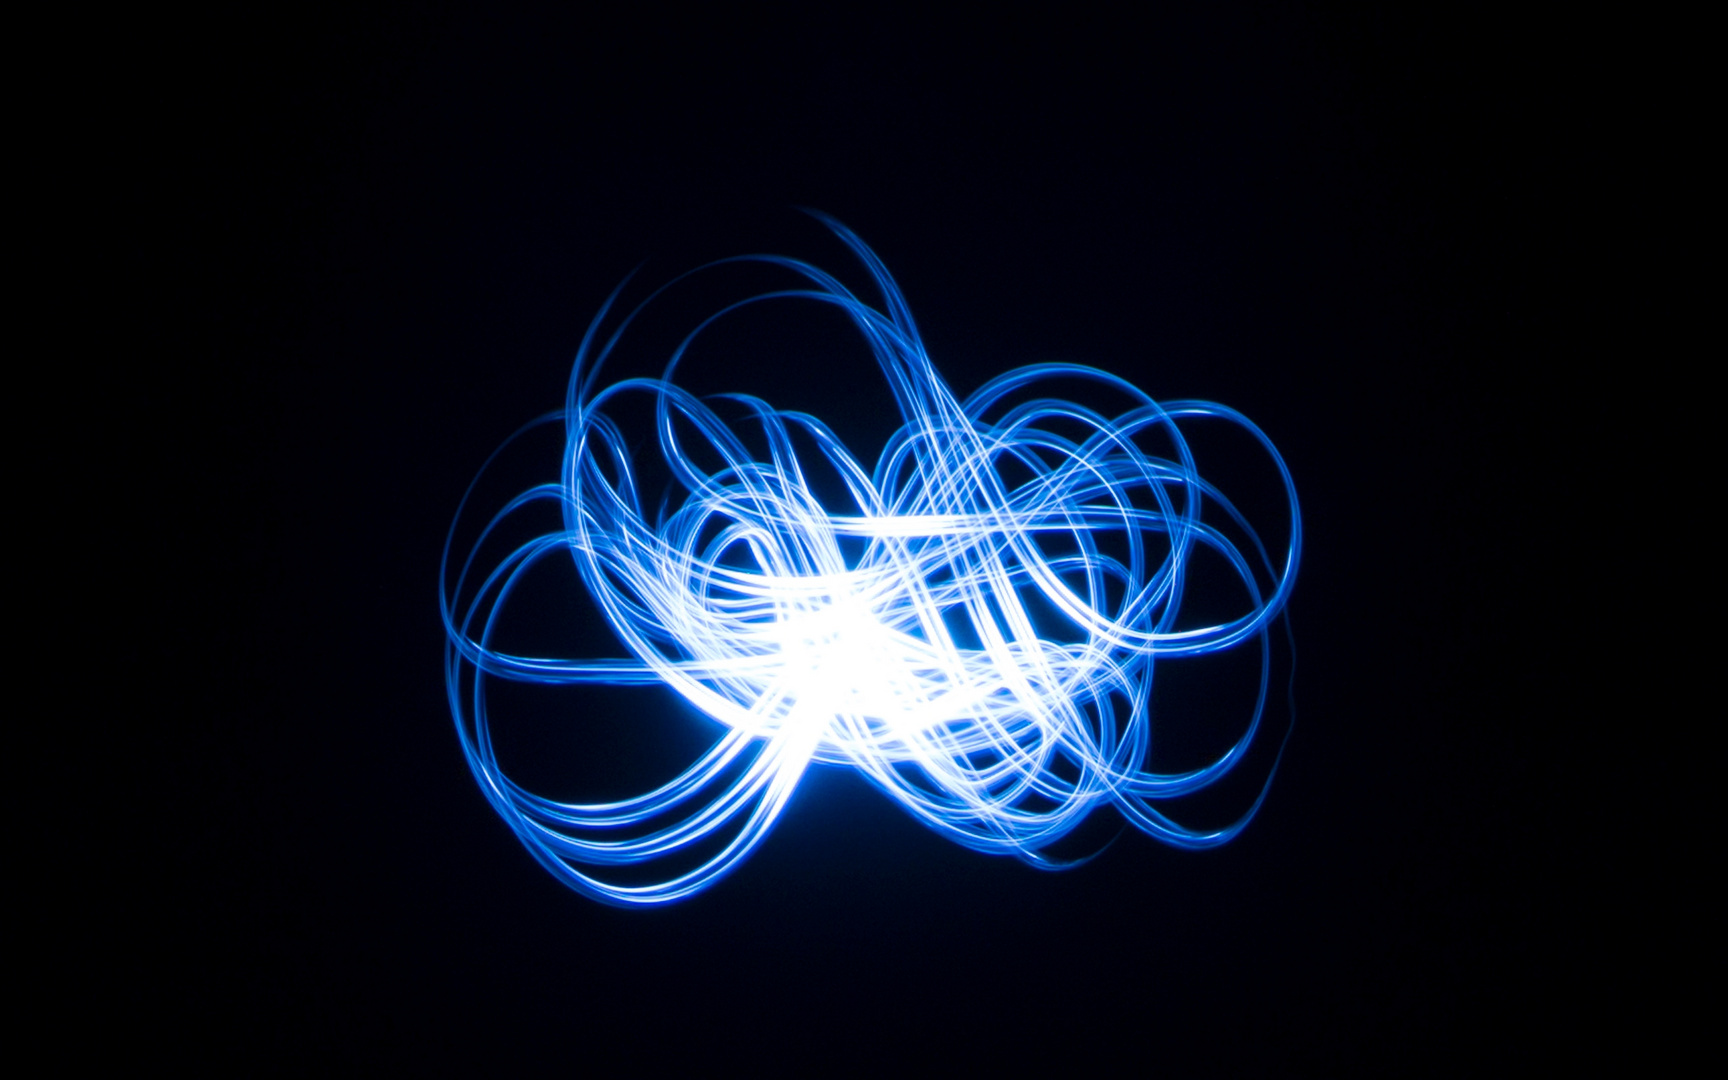 Lightpainting "the First"